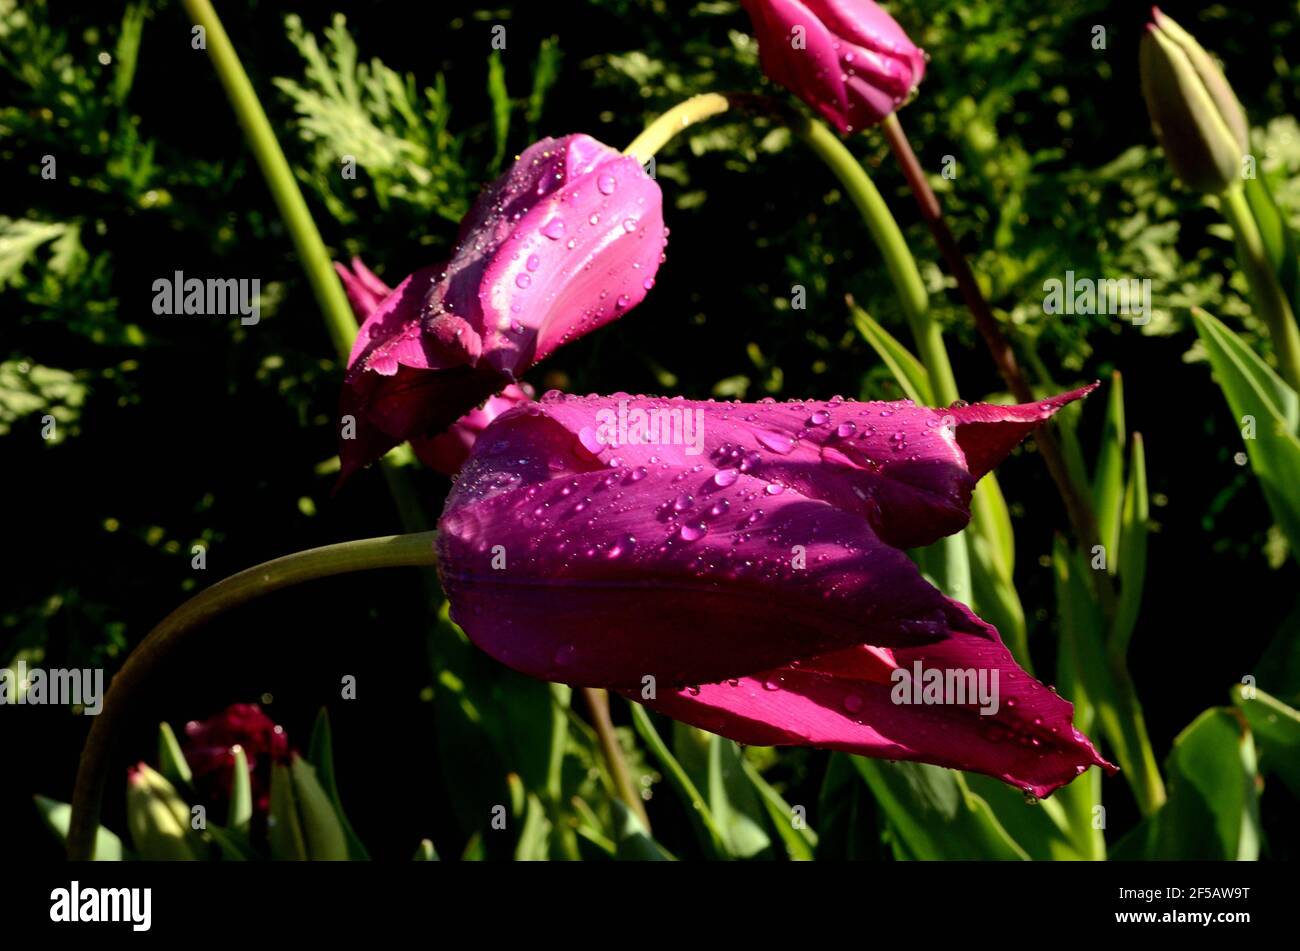 Vividly colorful tulips ready to garden greet you  bashing in the morning sun & showing off their better wet bloom petals. Stock Photo